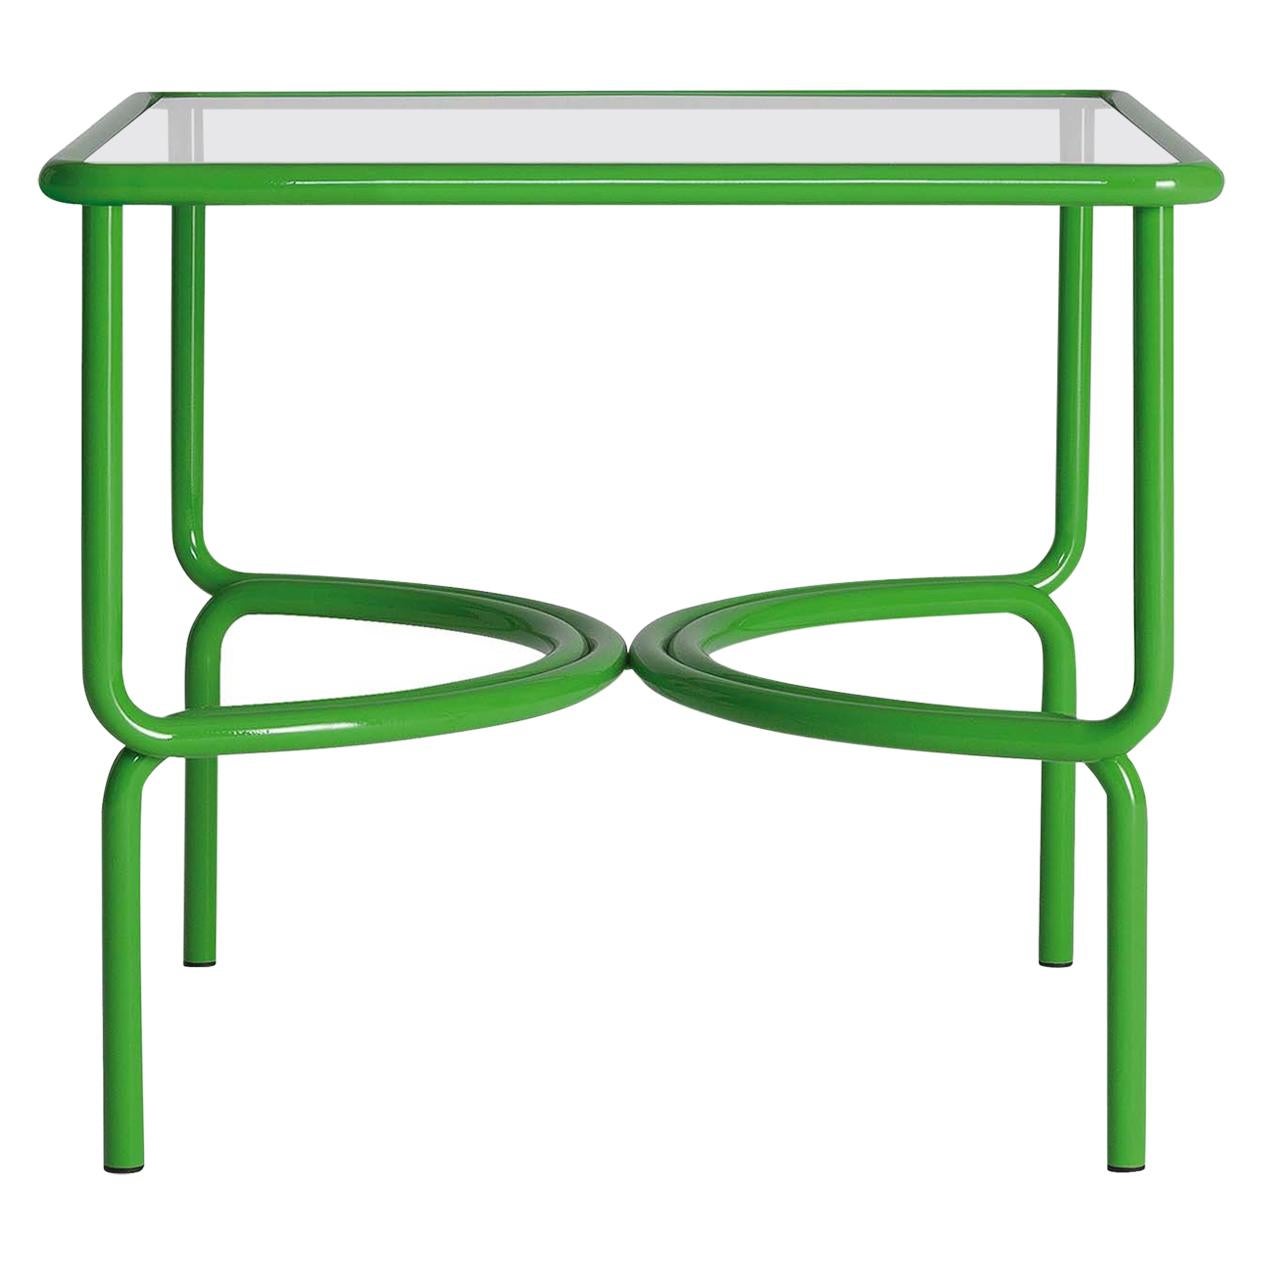 Locus Solus Green Dining Table by Gae Aulenti